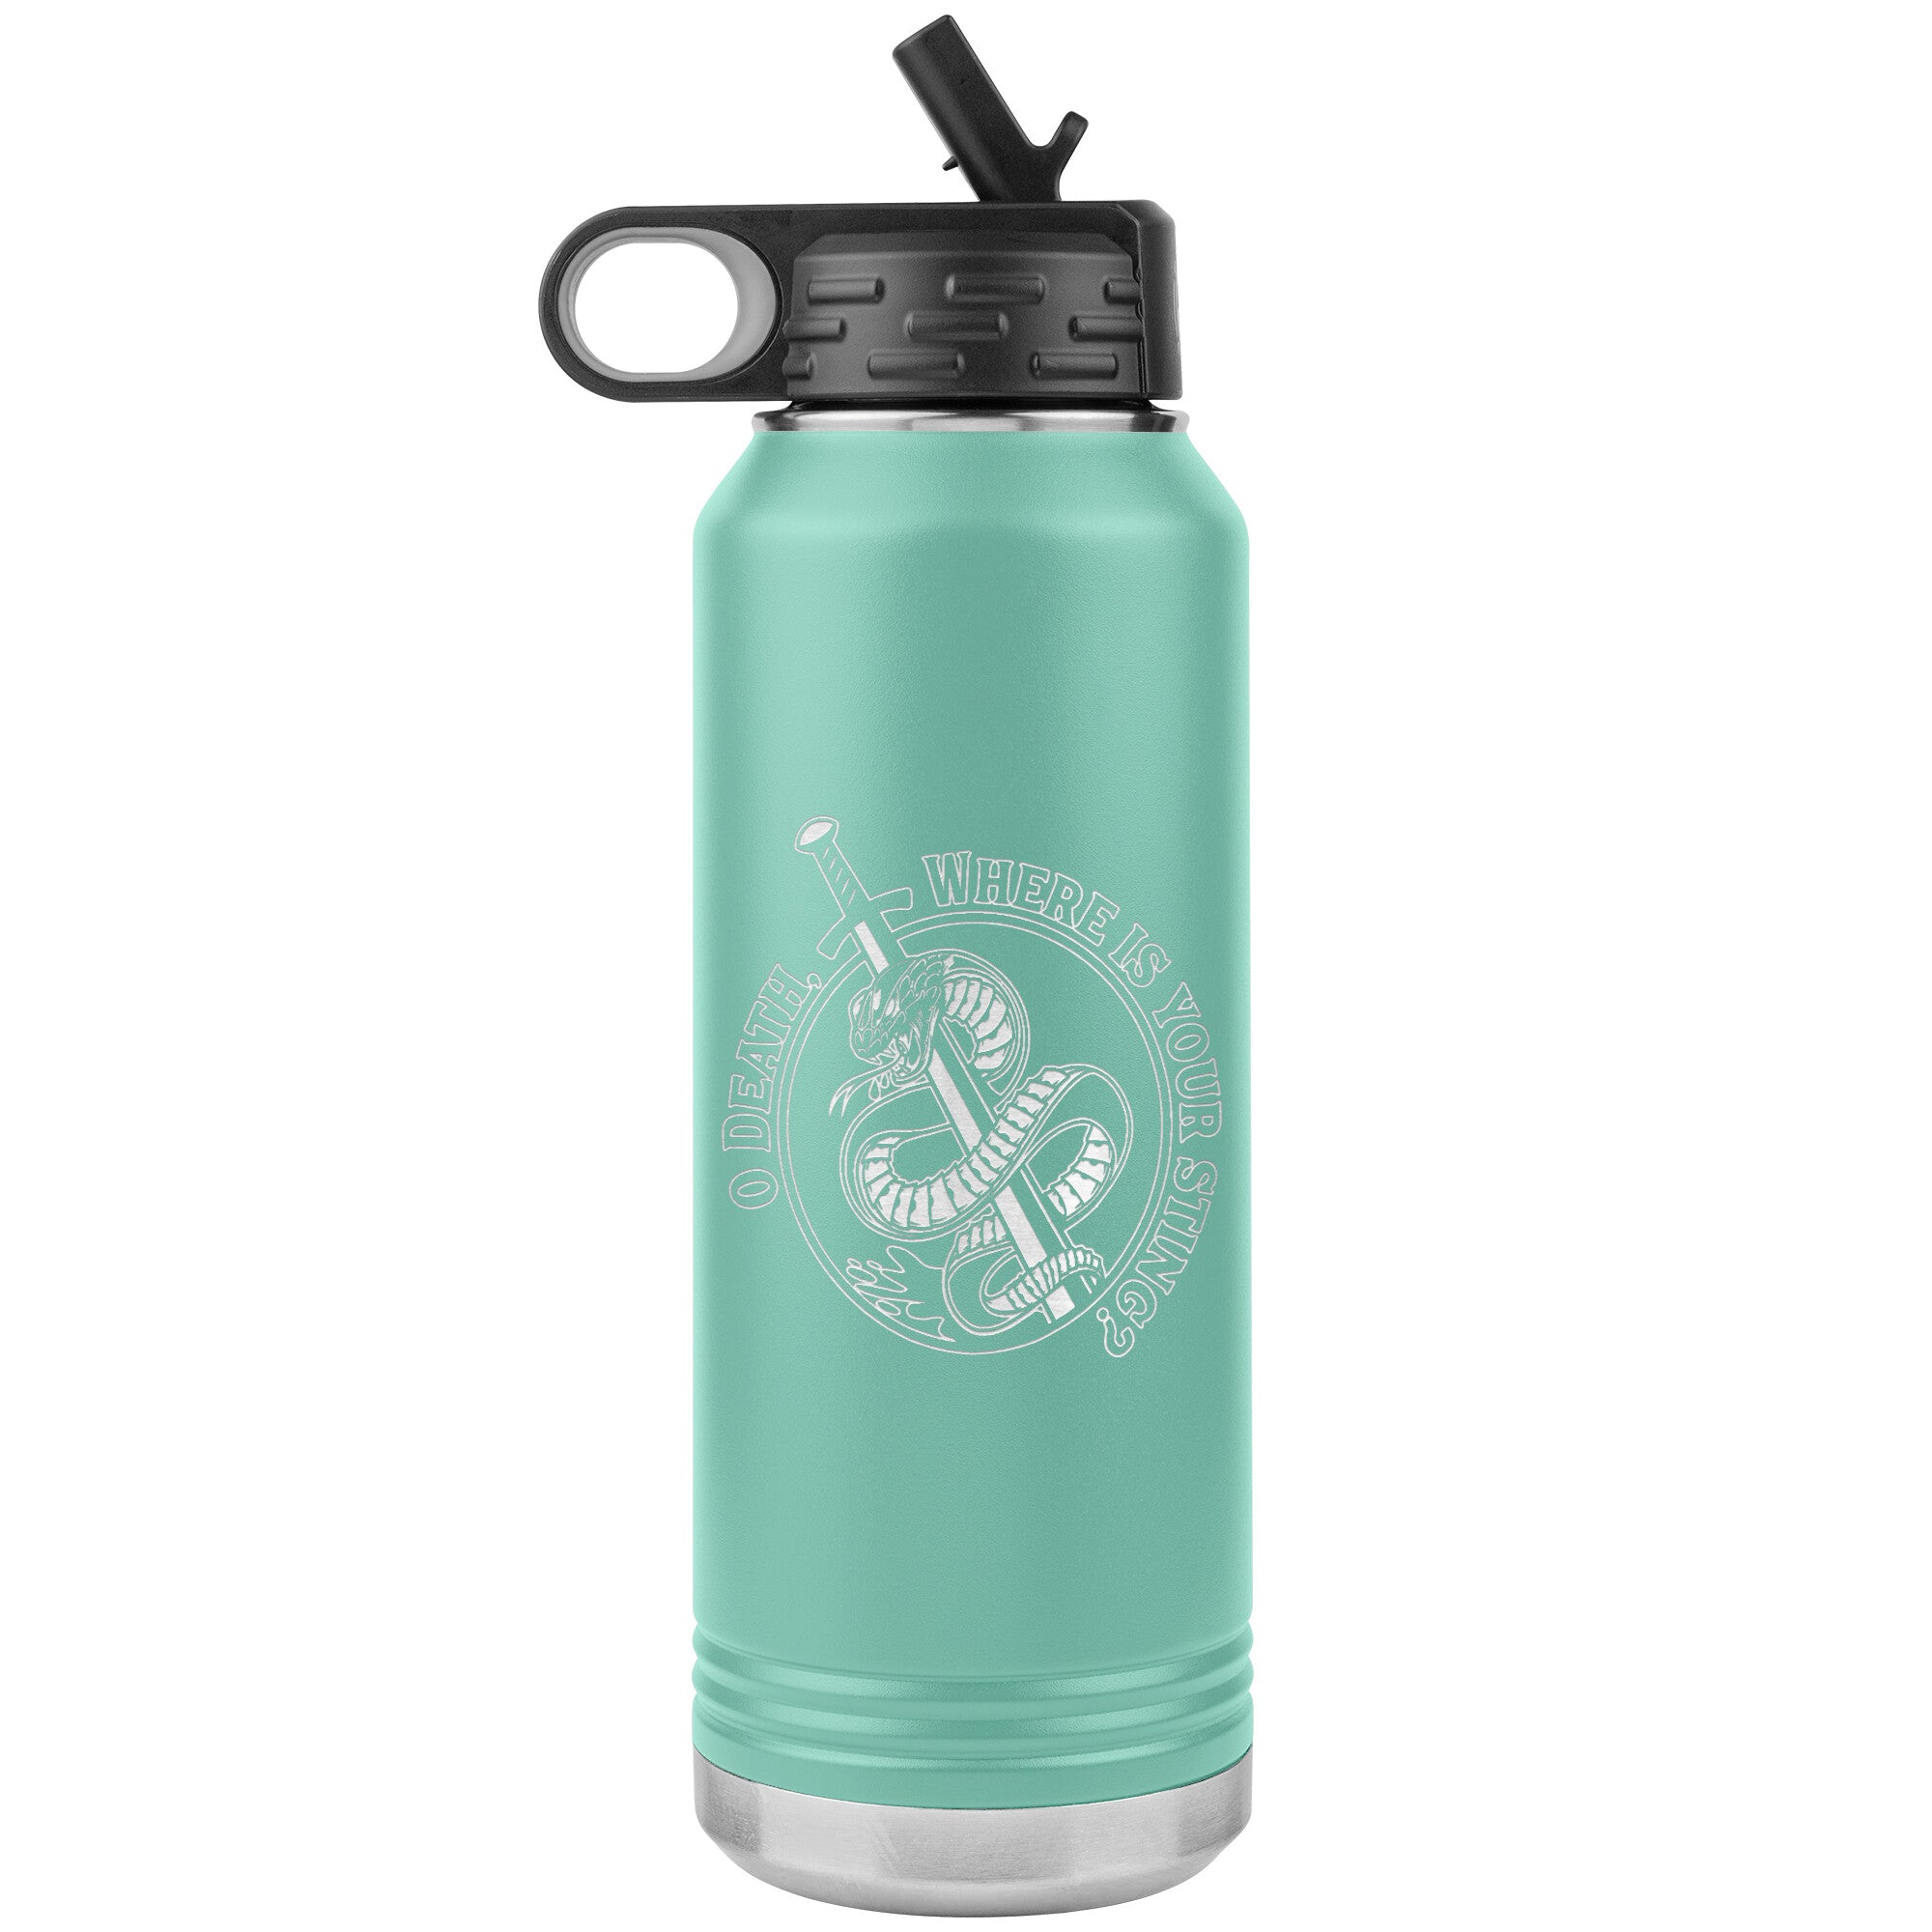 Where Is Your Sting? (32oz Bottle Tumbler)